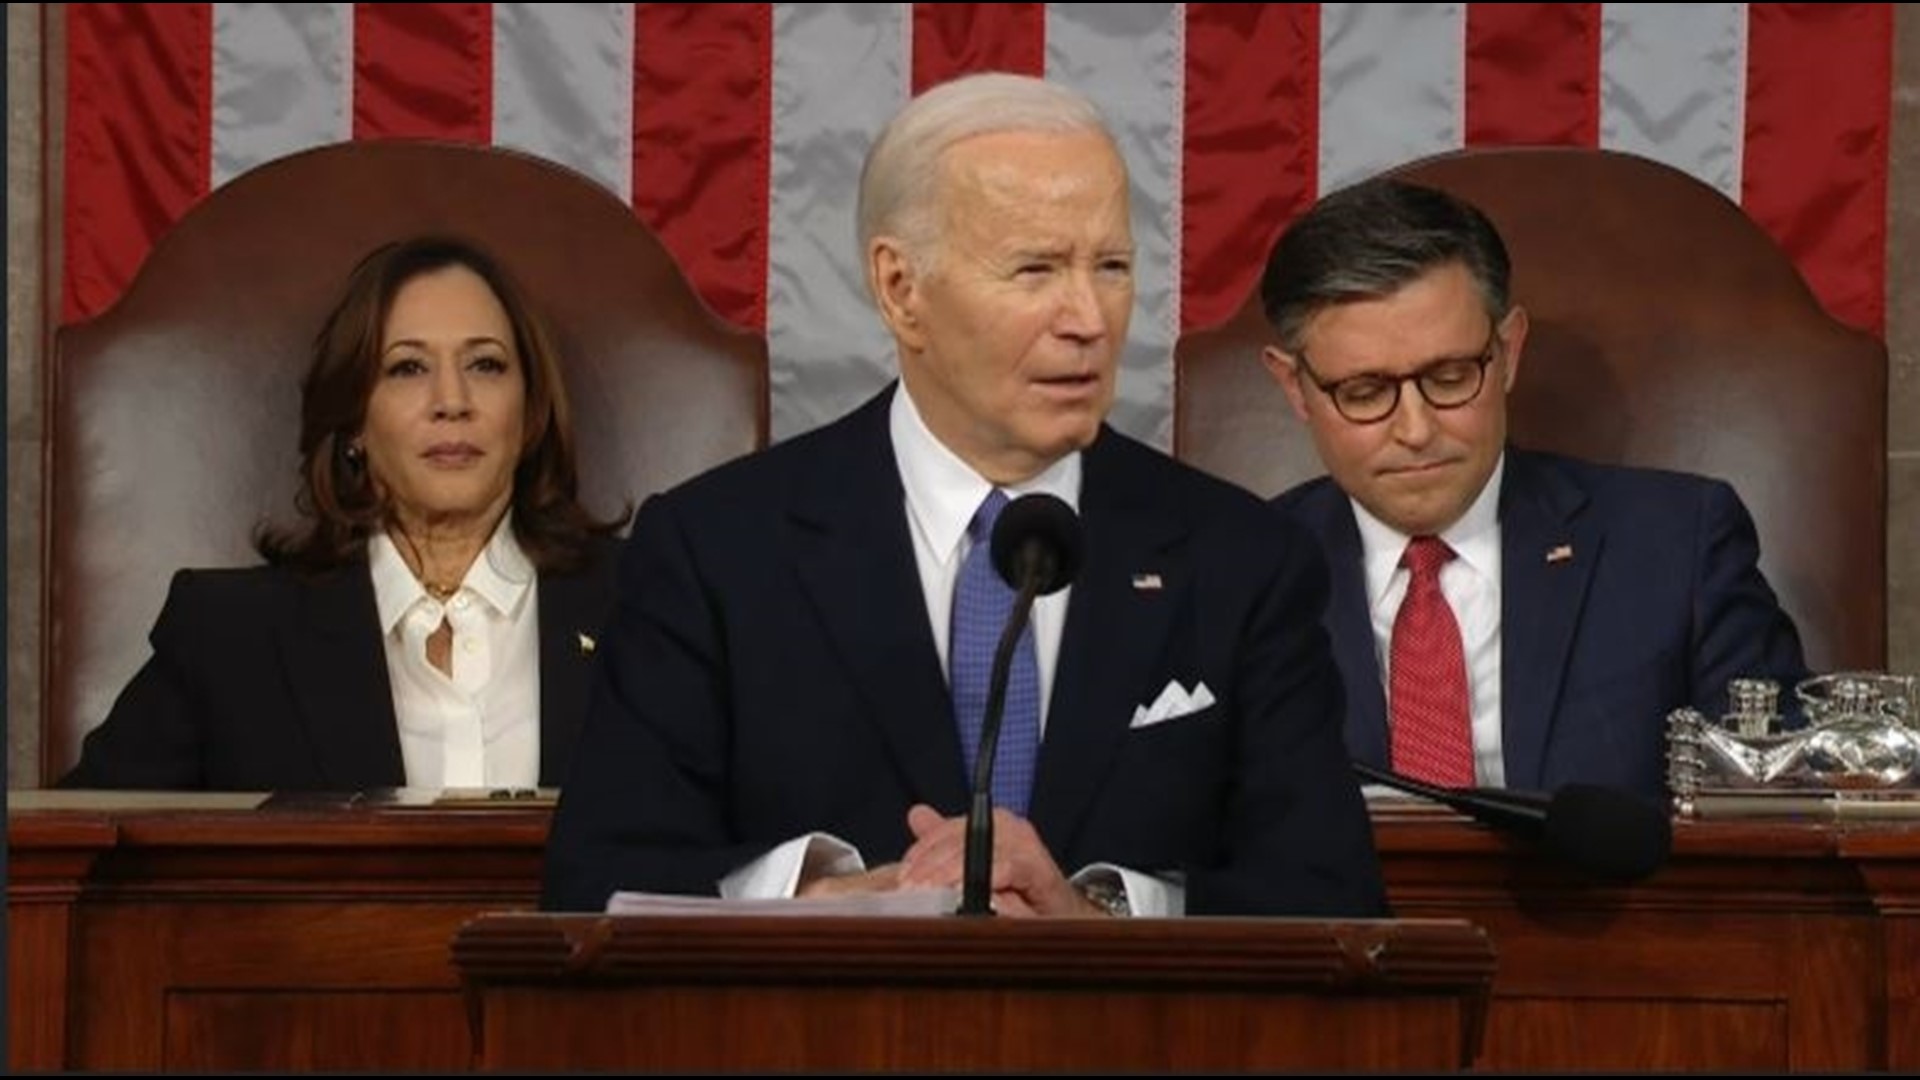 Biden delivered his annual address to Congress March 7.